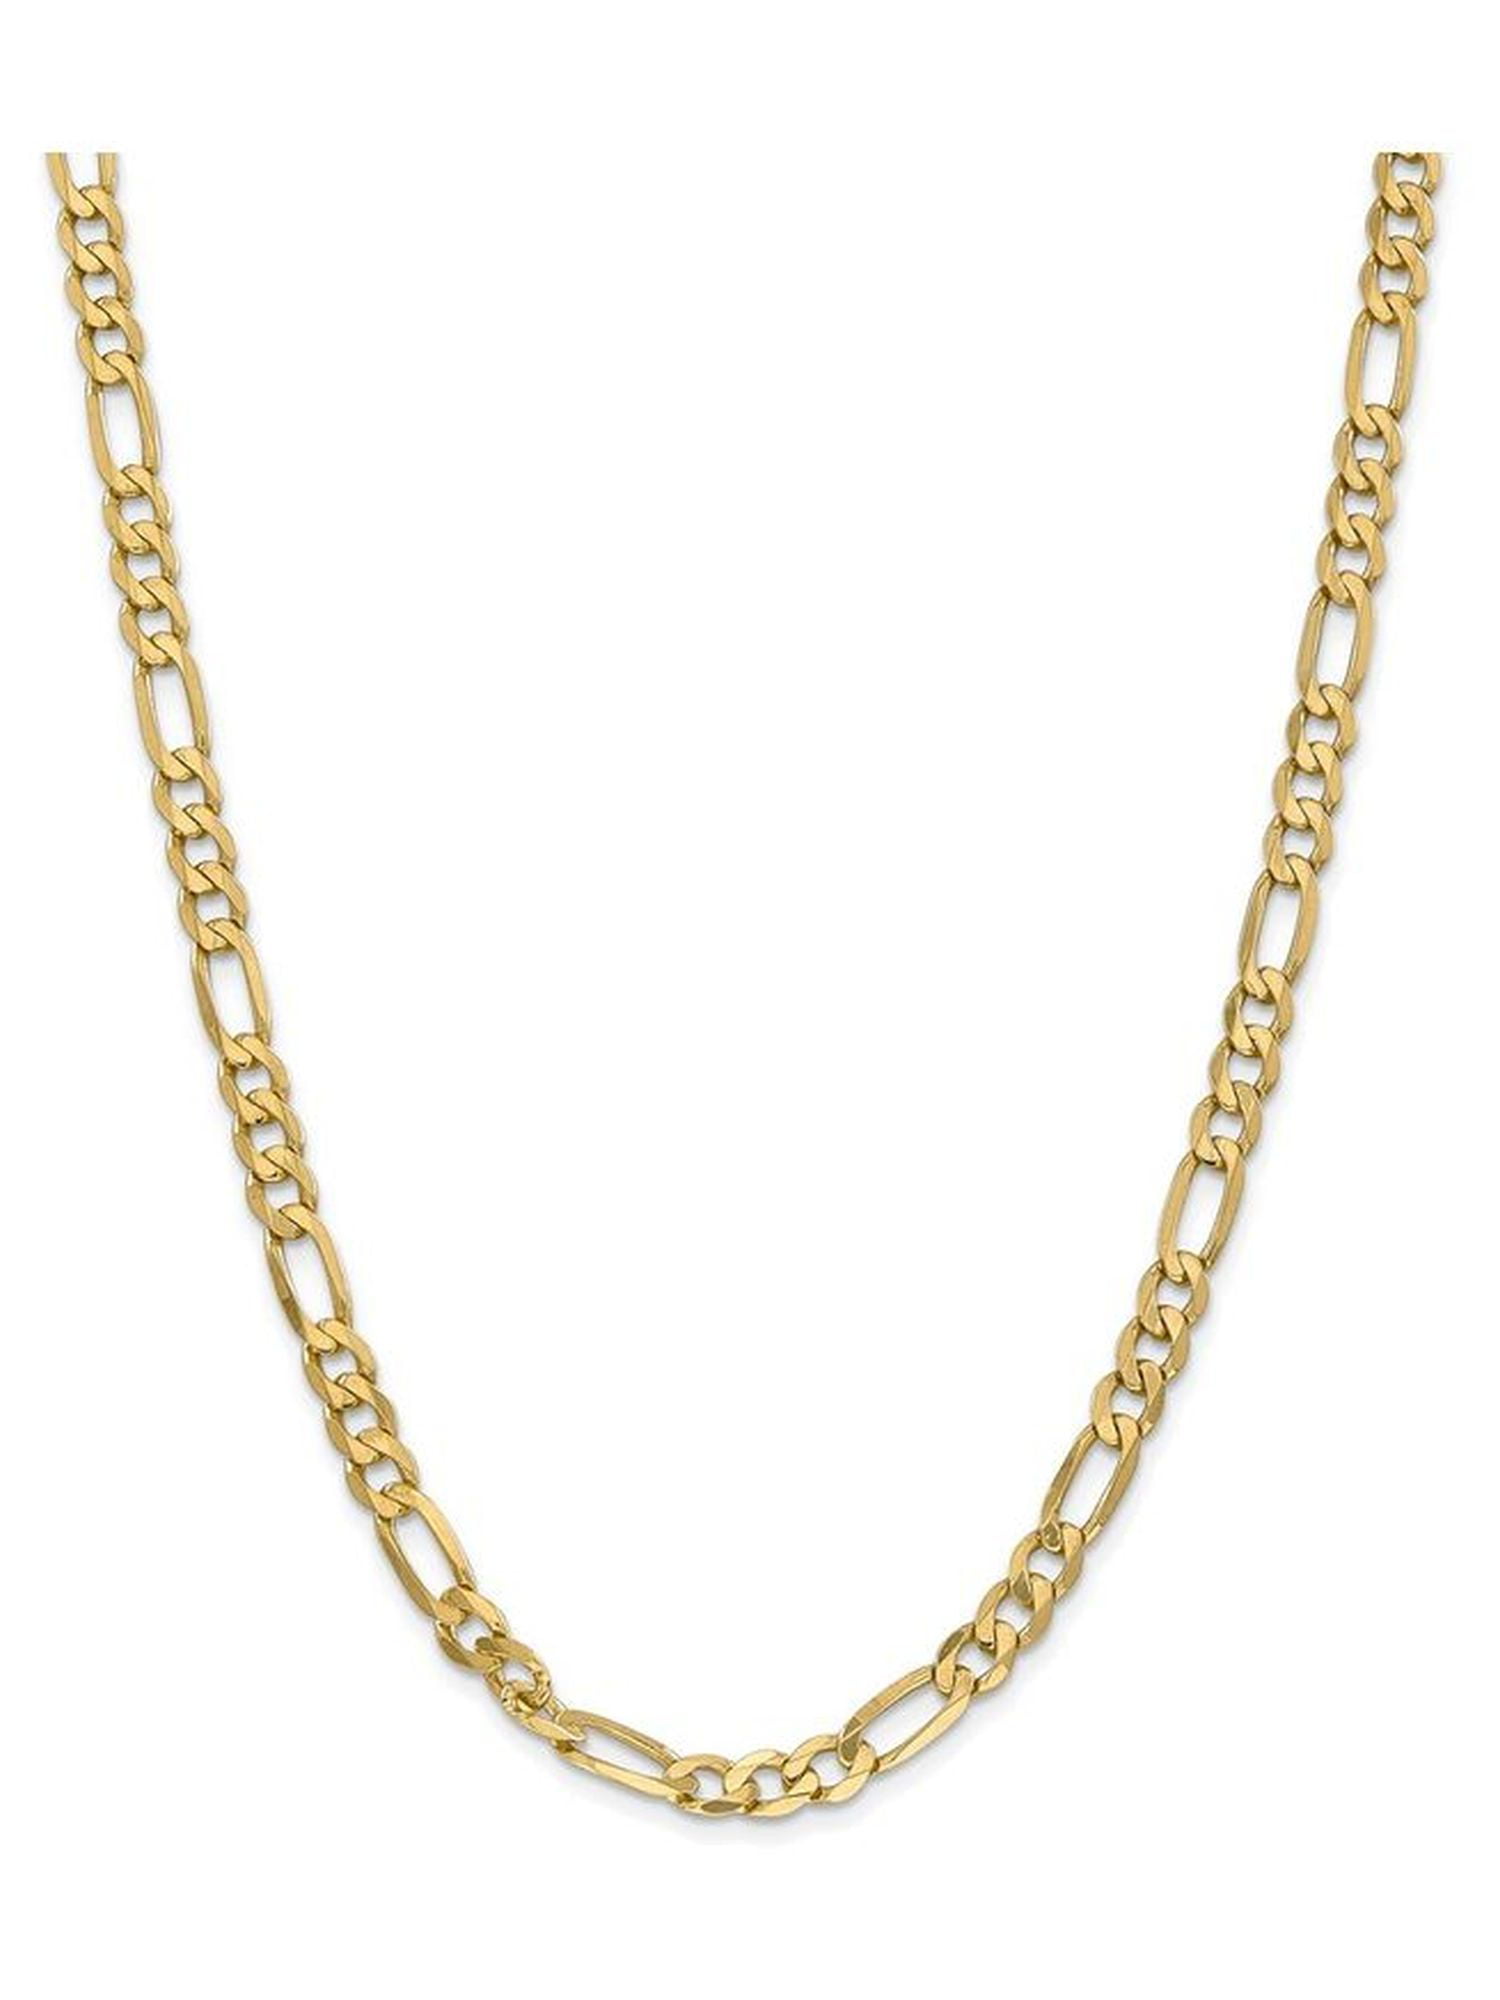 Jewel Tie 10k Yellow Gold 2.4mm Flat Beveled Cuban Curb Chain Necklace with Secure Lobster Lock Clasp